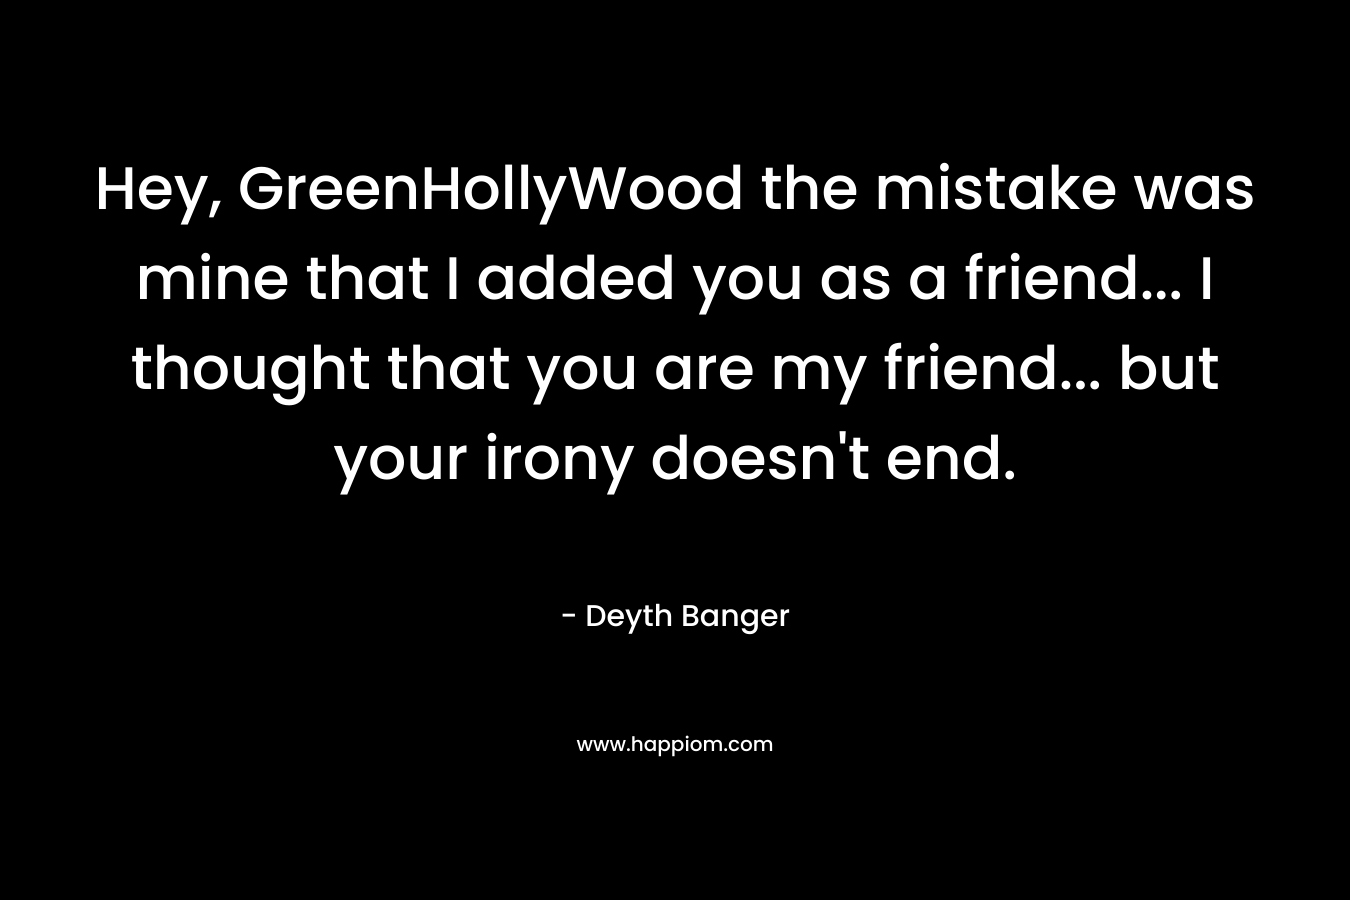 Hey, GreenHollyWood the mistake was mine that I added you as a friend... I thought that you are my friend... but your irony doesn't end.